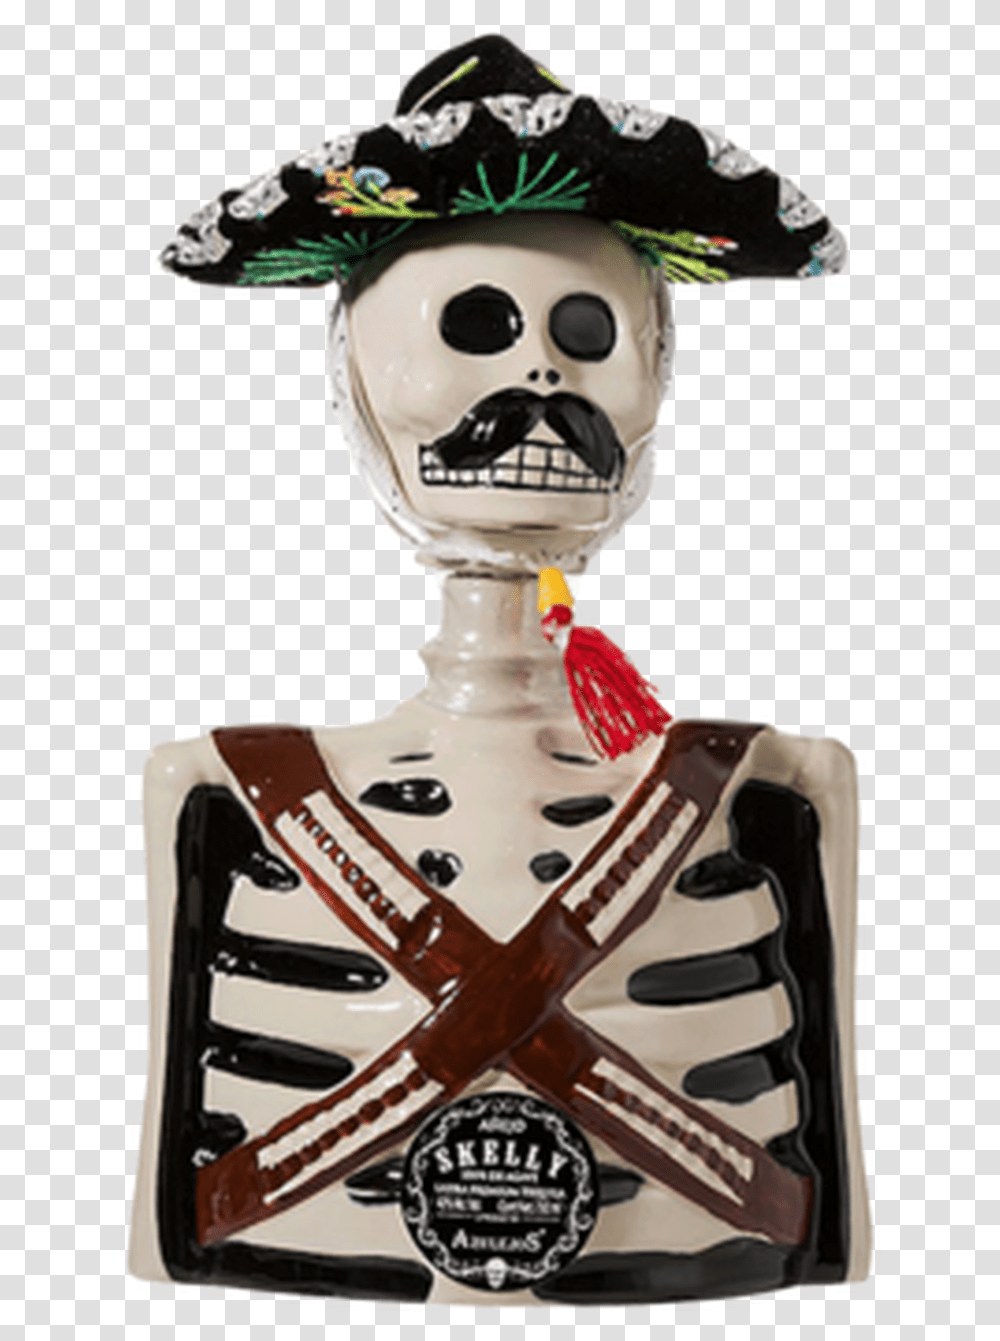 Skelly Anejo Tequila, Robot, Snowman, Winter, Outdoors Transparent Png